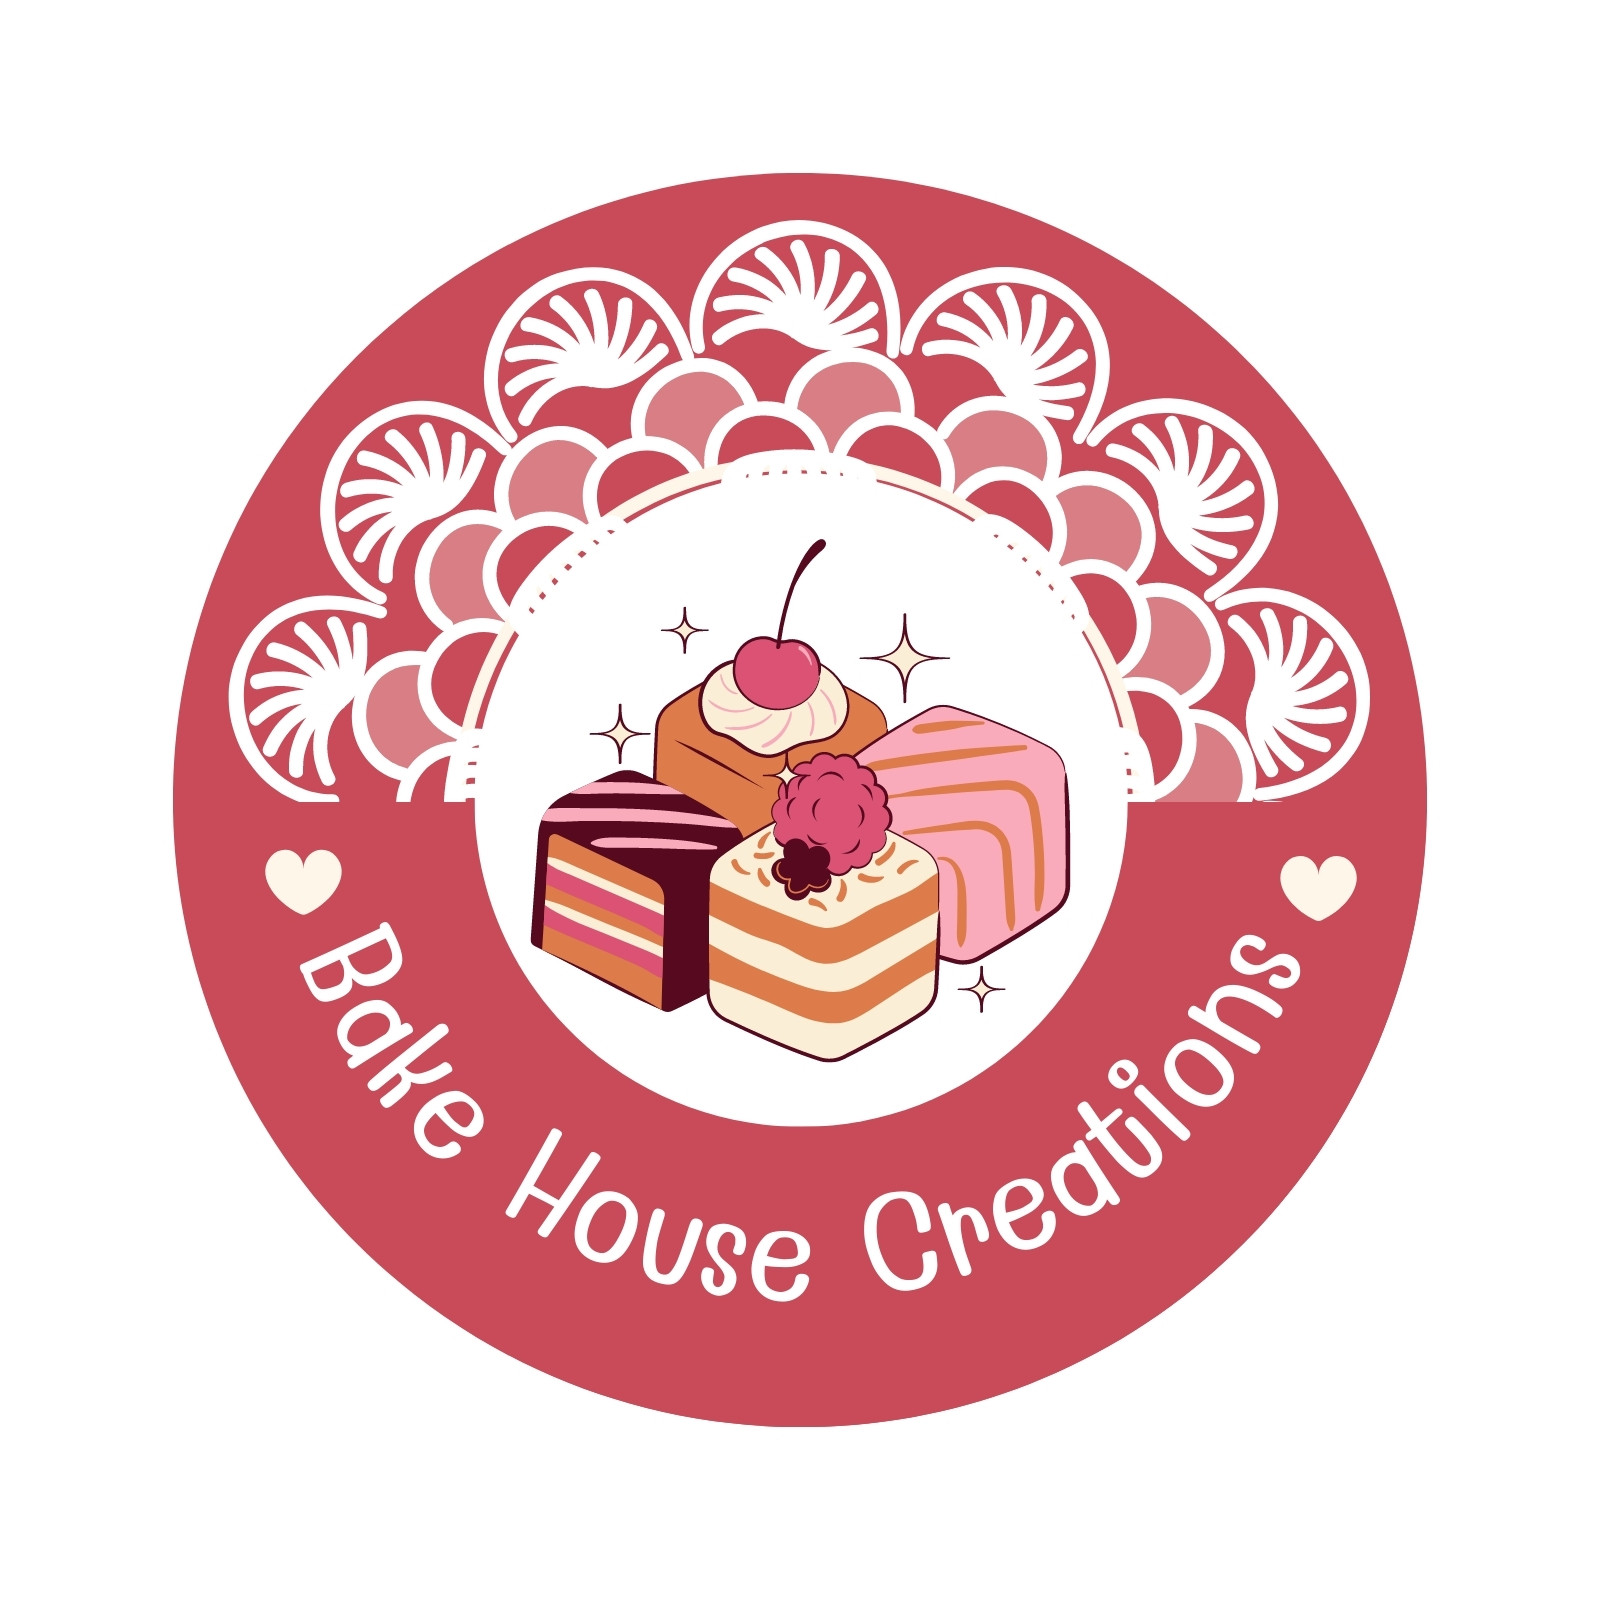 Abstract cakes with home logo design icon symbol Vector Image